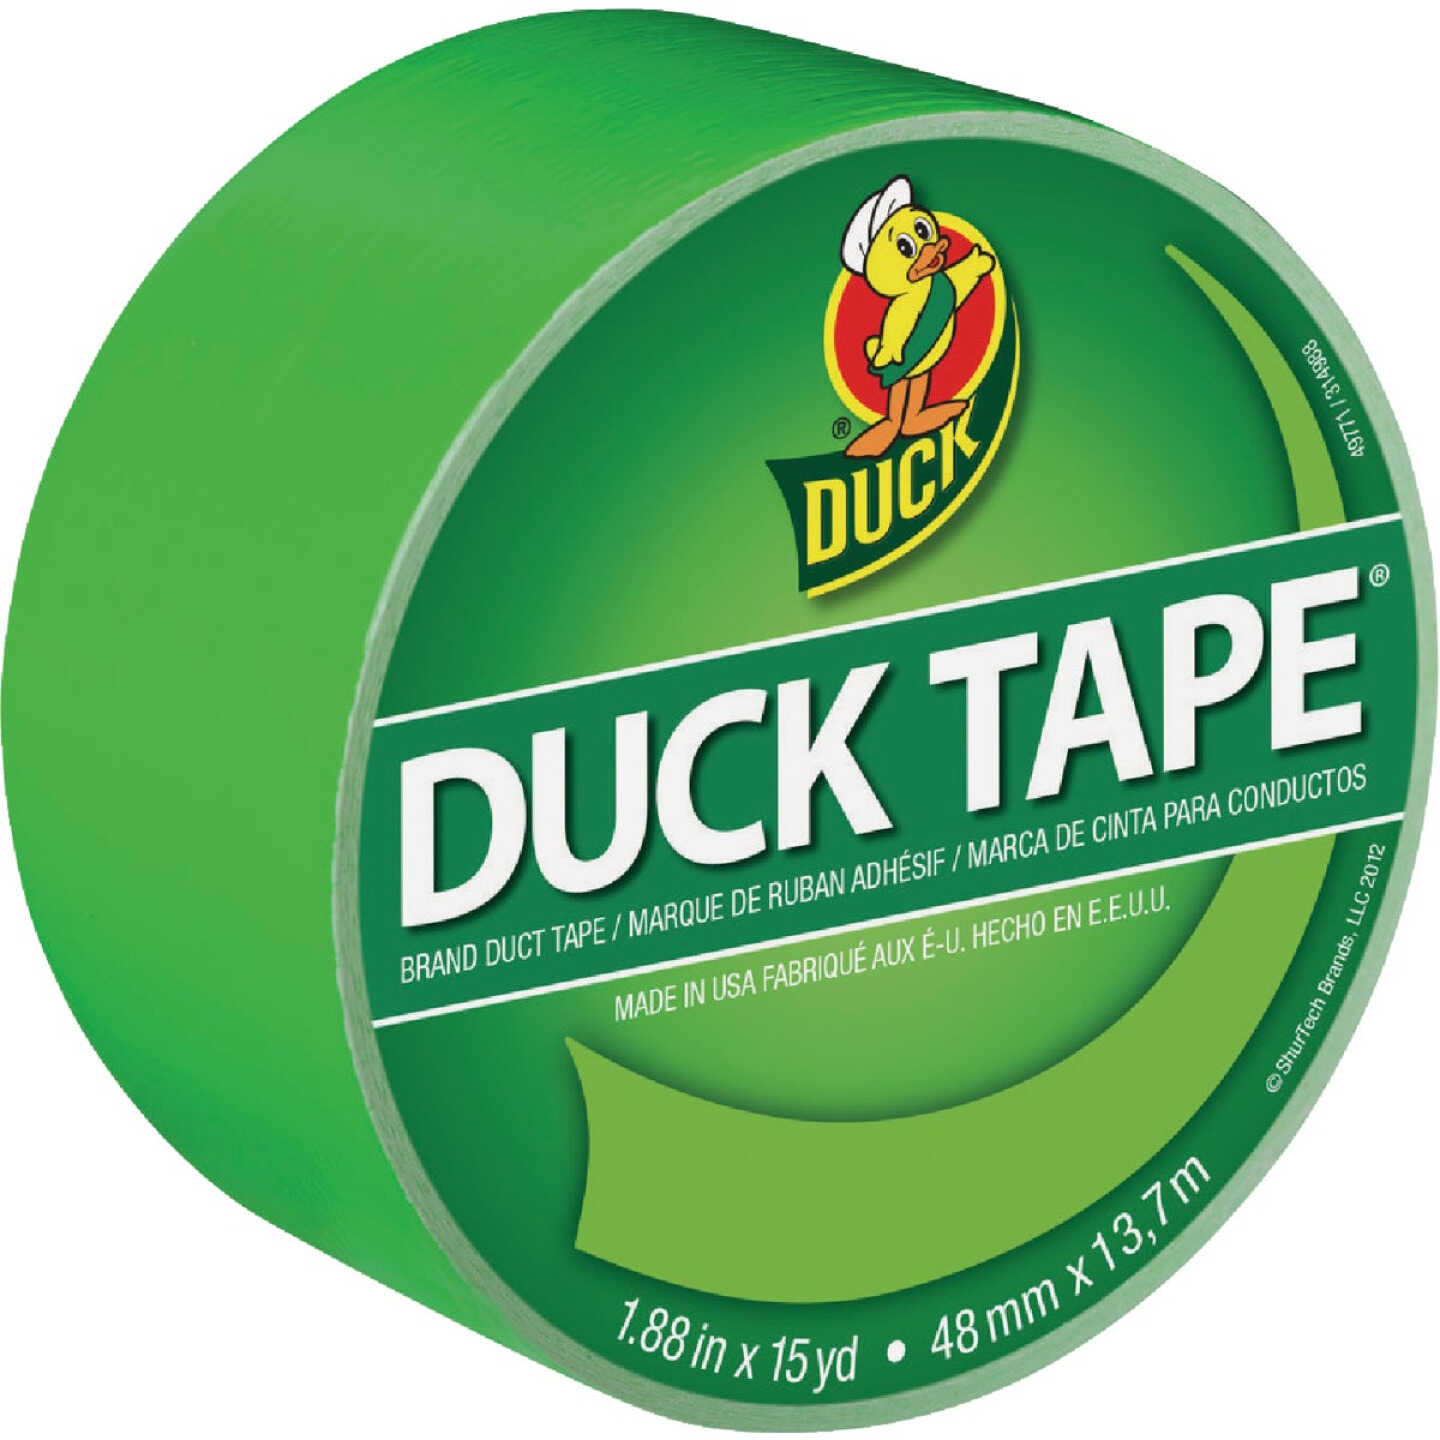 Duck 1265015 Colored Duct Tape, 1.88 x 20 yd. Size, White